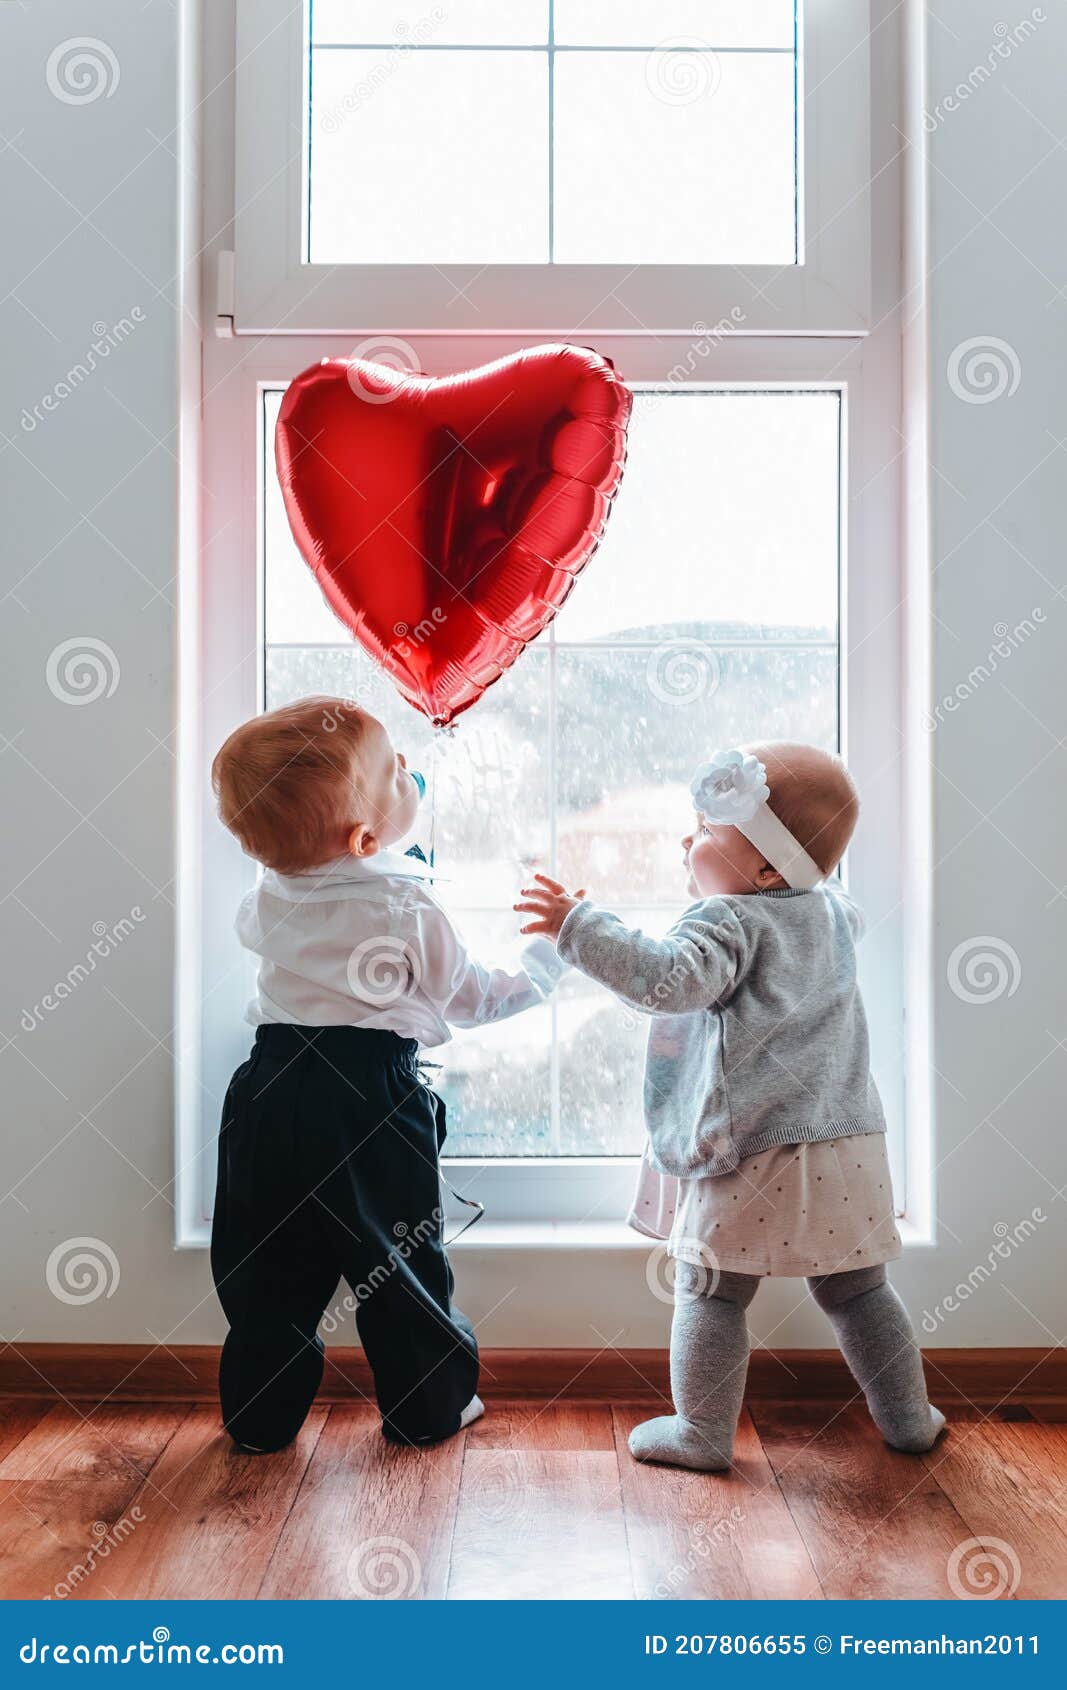 Cute Baby Boy and Baby Girl Looking at the Red Heart Balloon ...